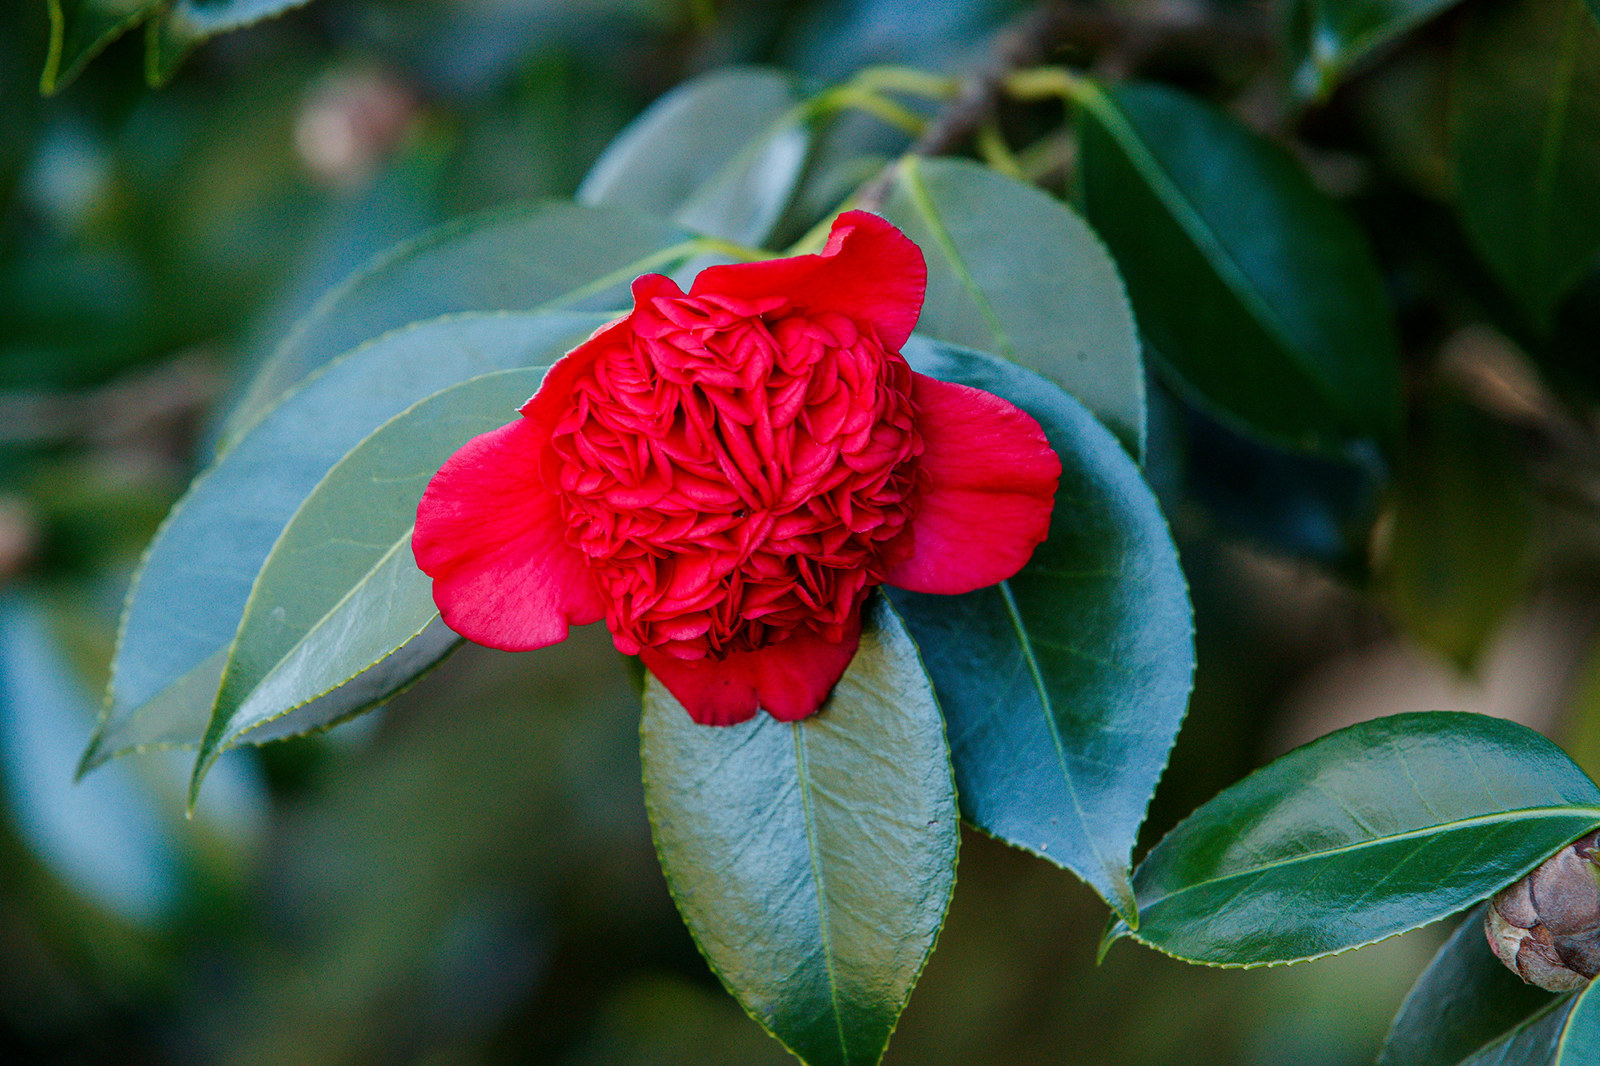 Vivid red waratah-shaped flower with large green leaves.